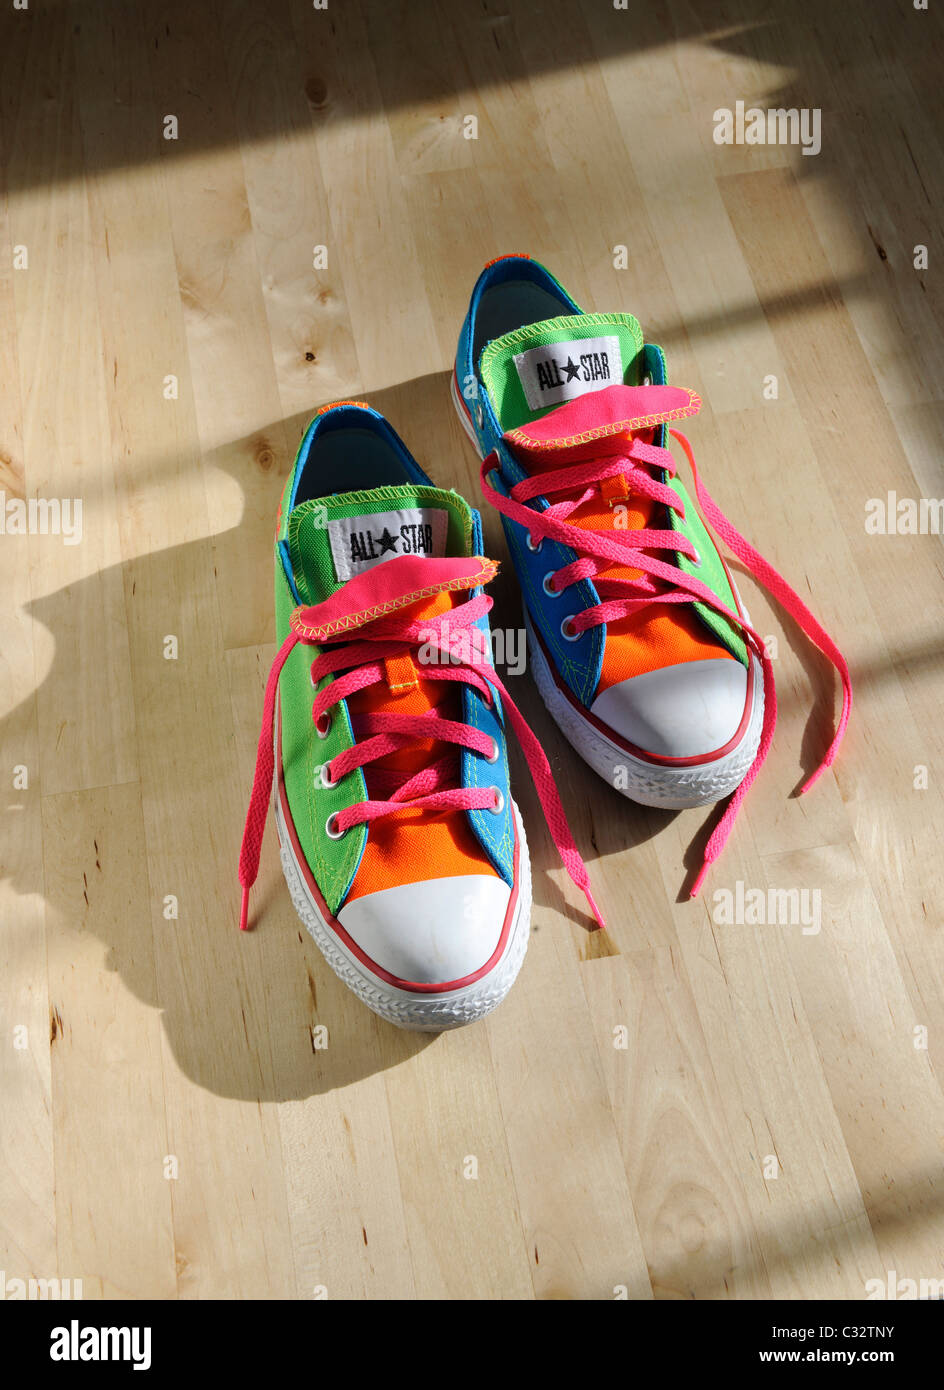 New Converse All Star sneakers ordered from website where user picks colors to combine Stock - Alamy